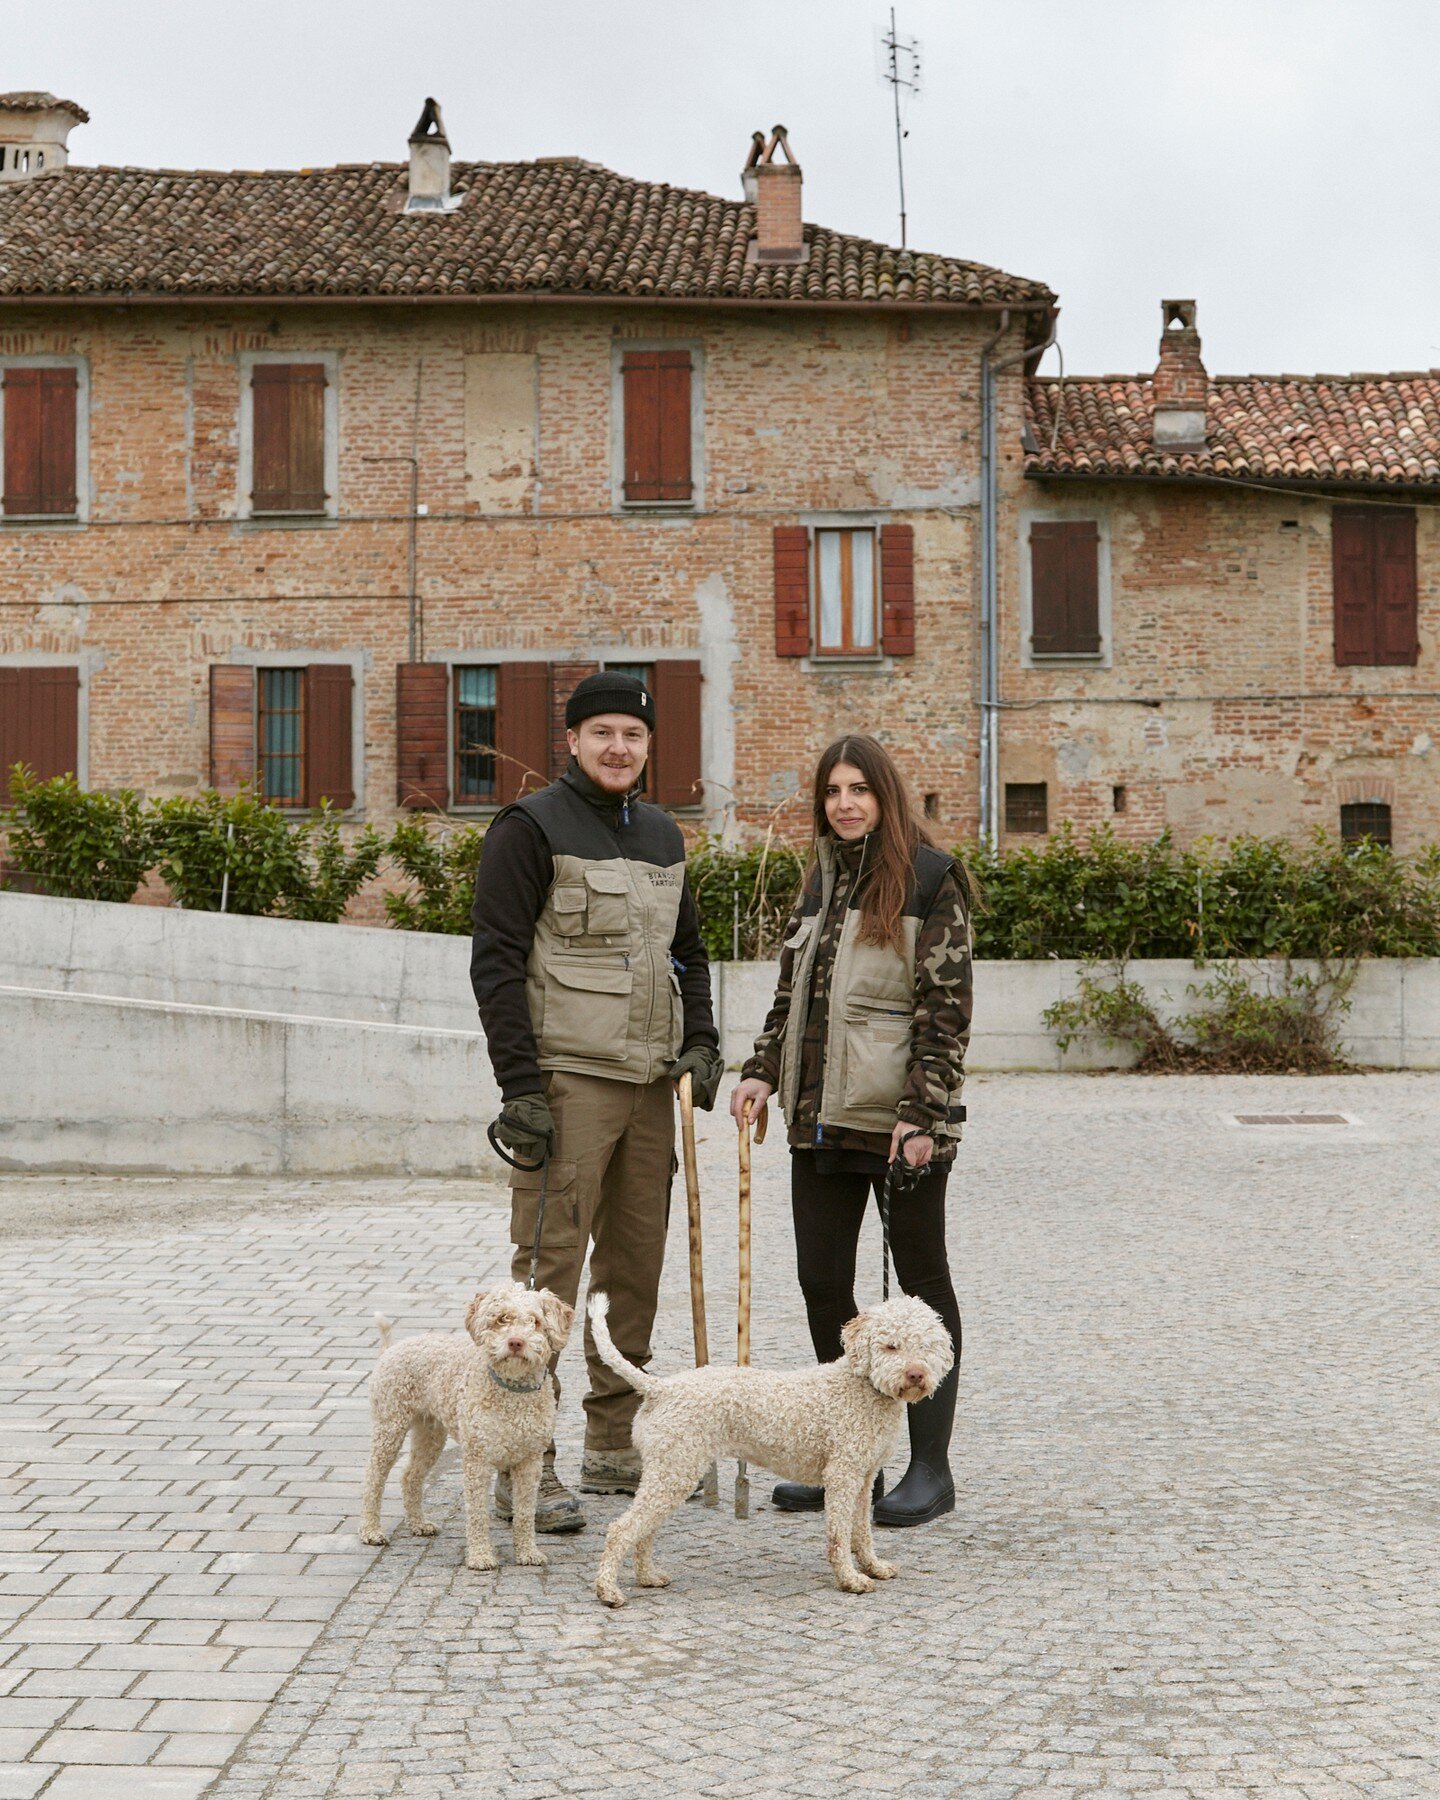 Thinking about the future and changing the game.

Truffle hunting has never been so much fun, today a group of youngsters are changing the way things work in the truffle world. Working together as friends in teams, they are able to cover more ground,